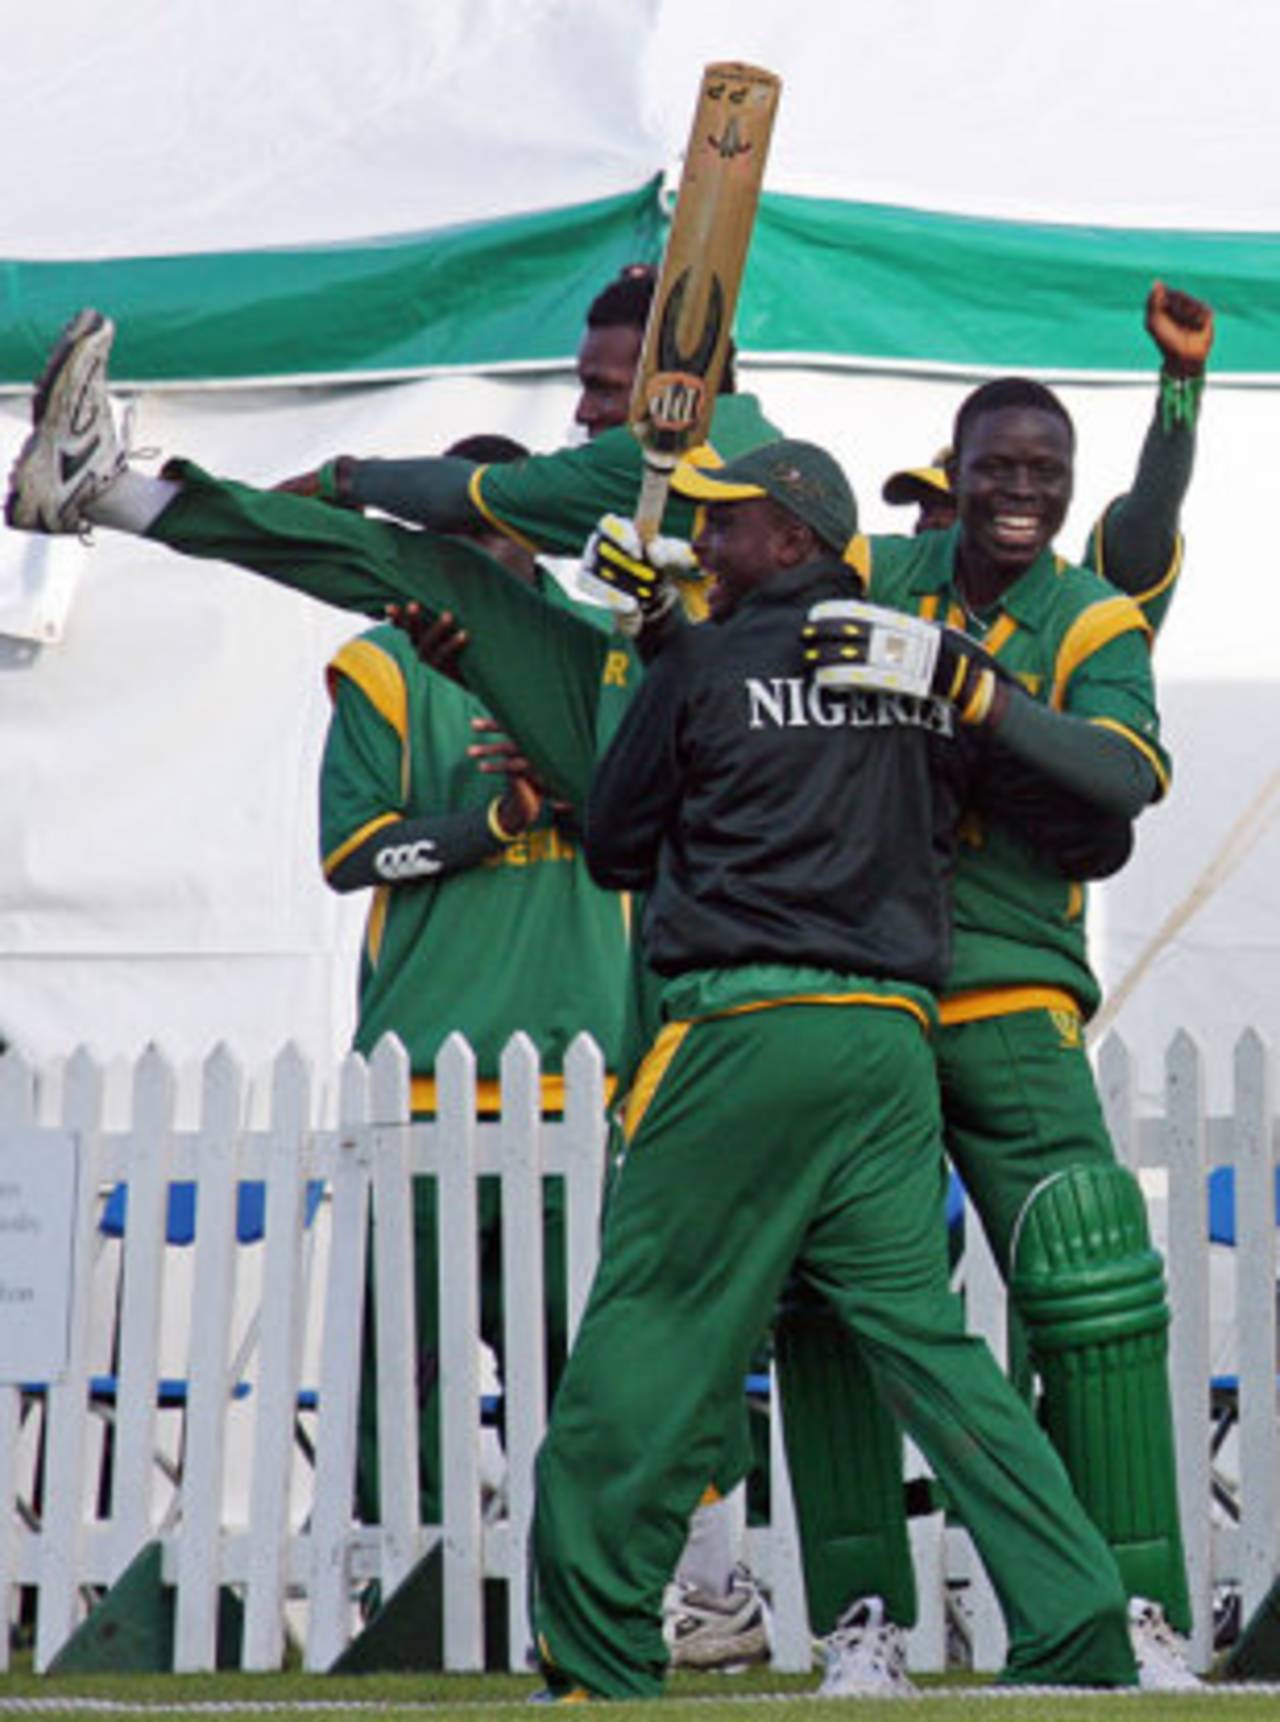 Nigeria celebrate after beating Japan, ICC World Cricket League Division 7, Guernsey, May 18, 2009